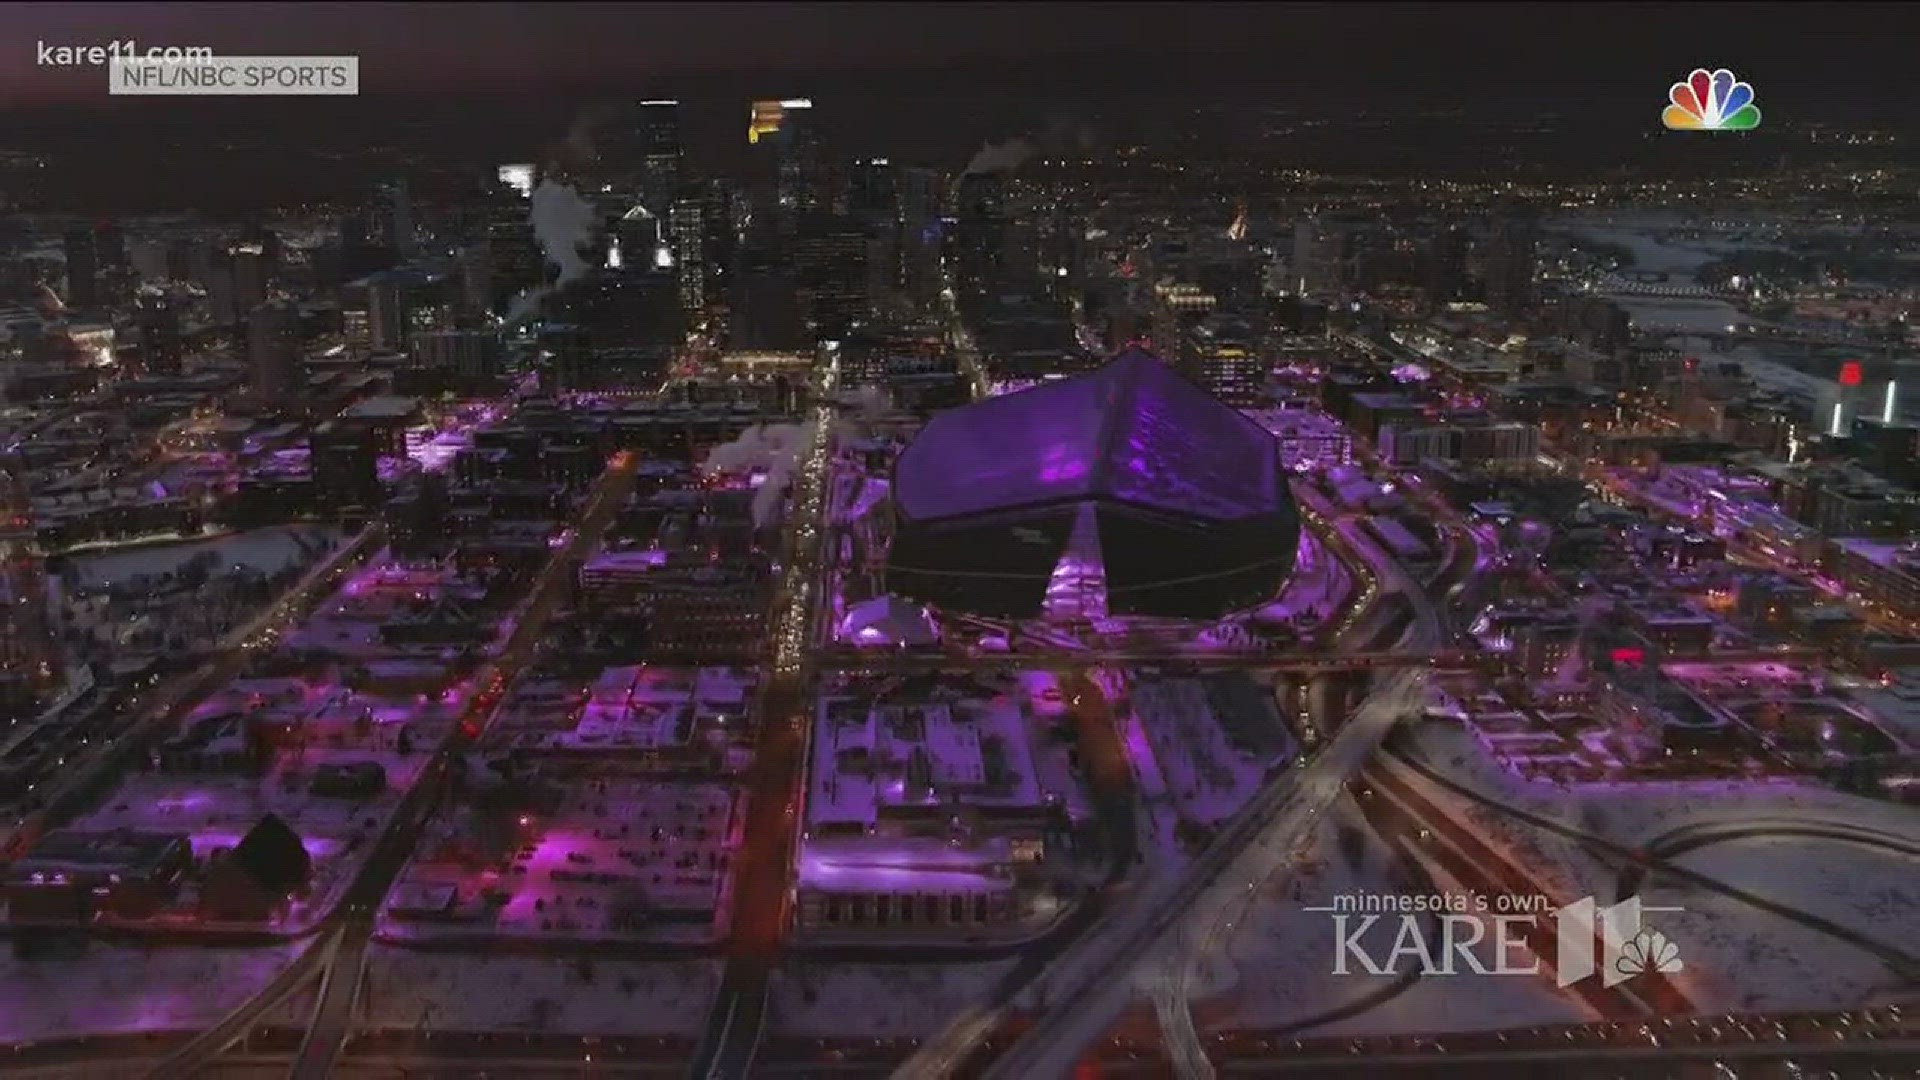 Cory Hepola digs into the Super Bowl Halftime Show, including that magic moment where the city of Minneapolis appeared to turn purple. http://kare11.tv/2ELevS8